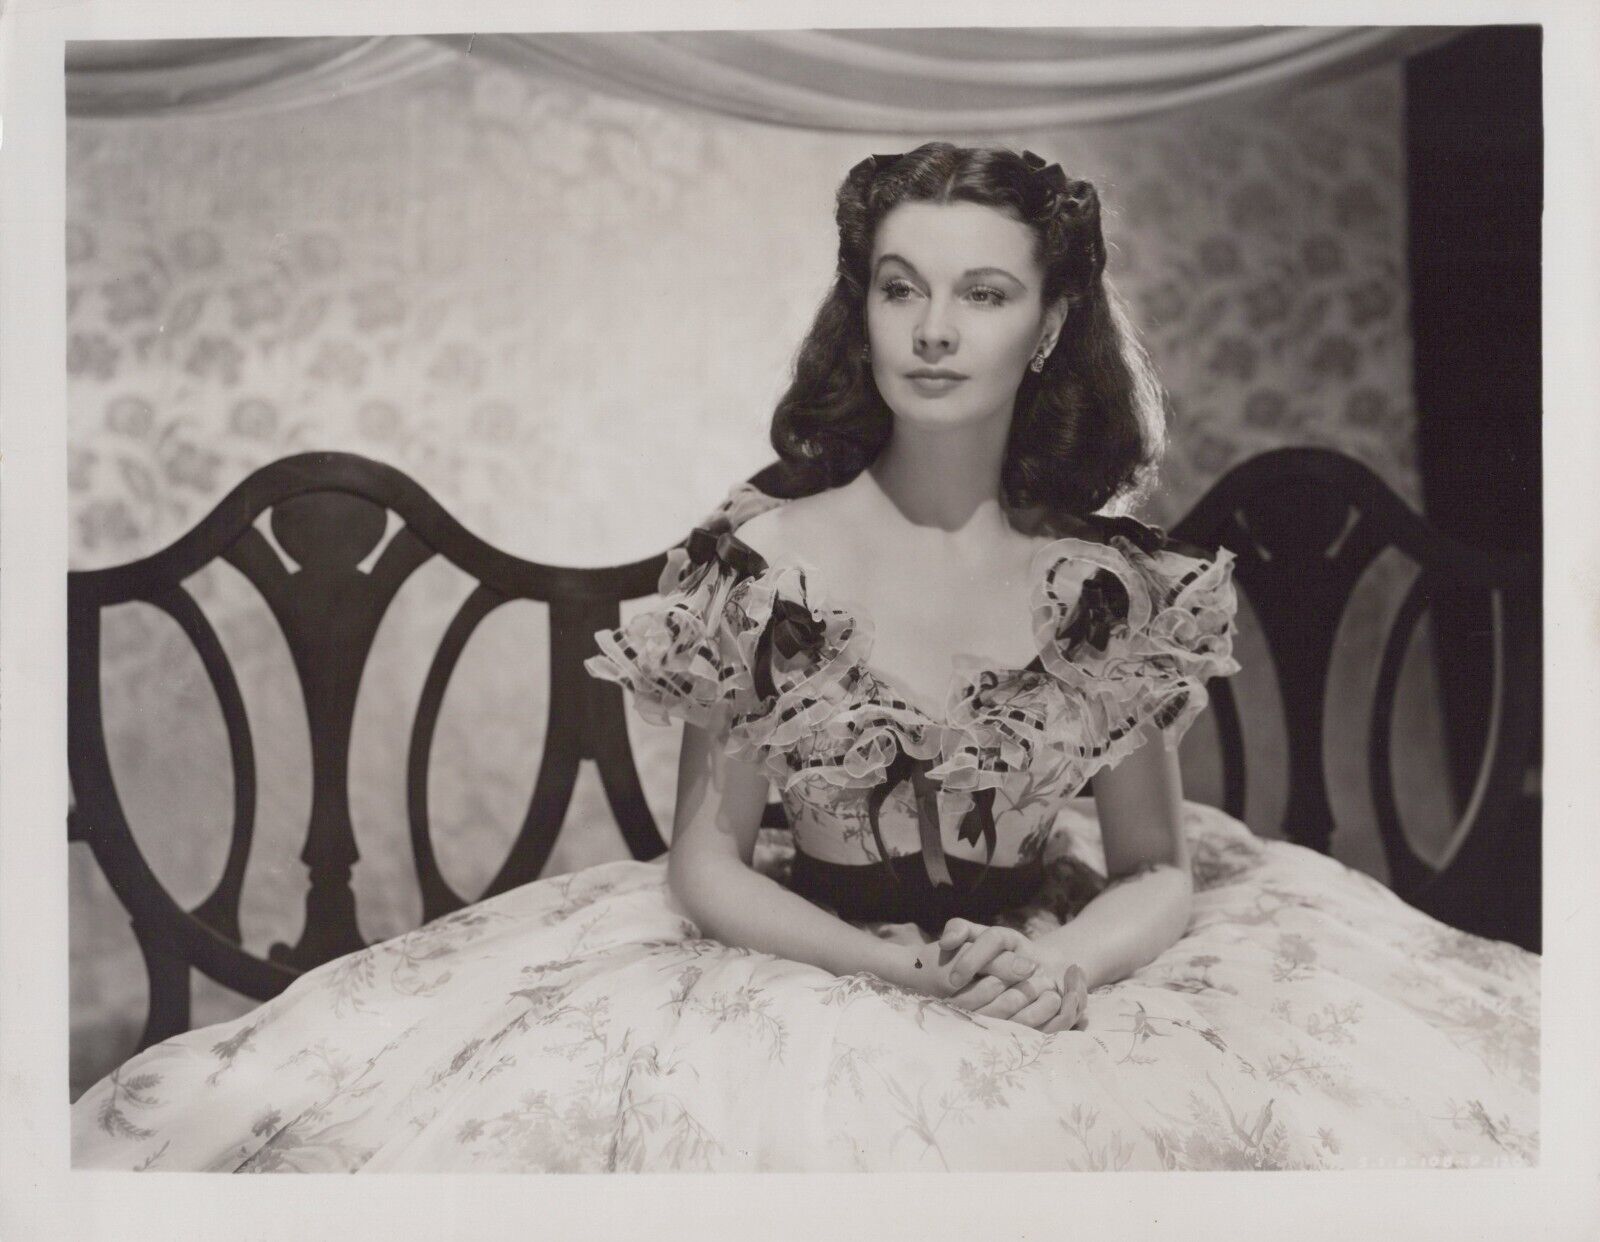 HOLLYWOOD BEAUTY VIVIEN LEIGH in GONE WIND STUNNING PORTRAIT 1950s Photo C22